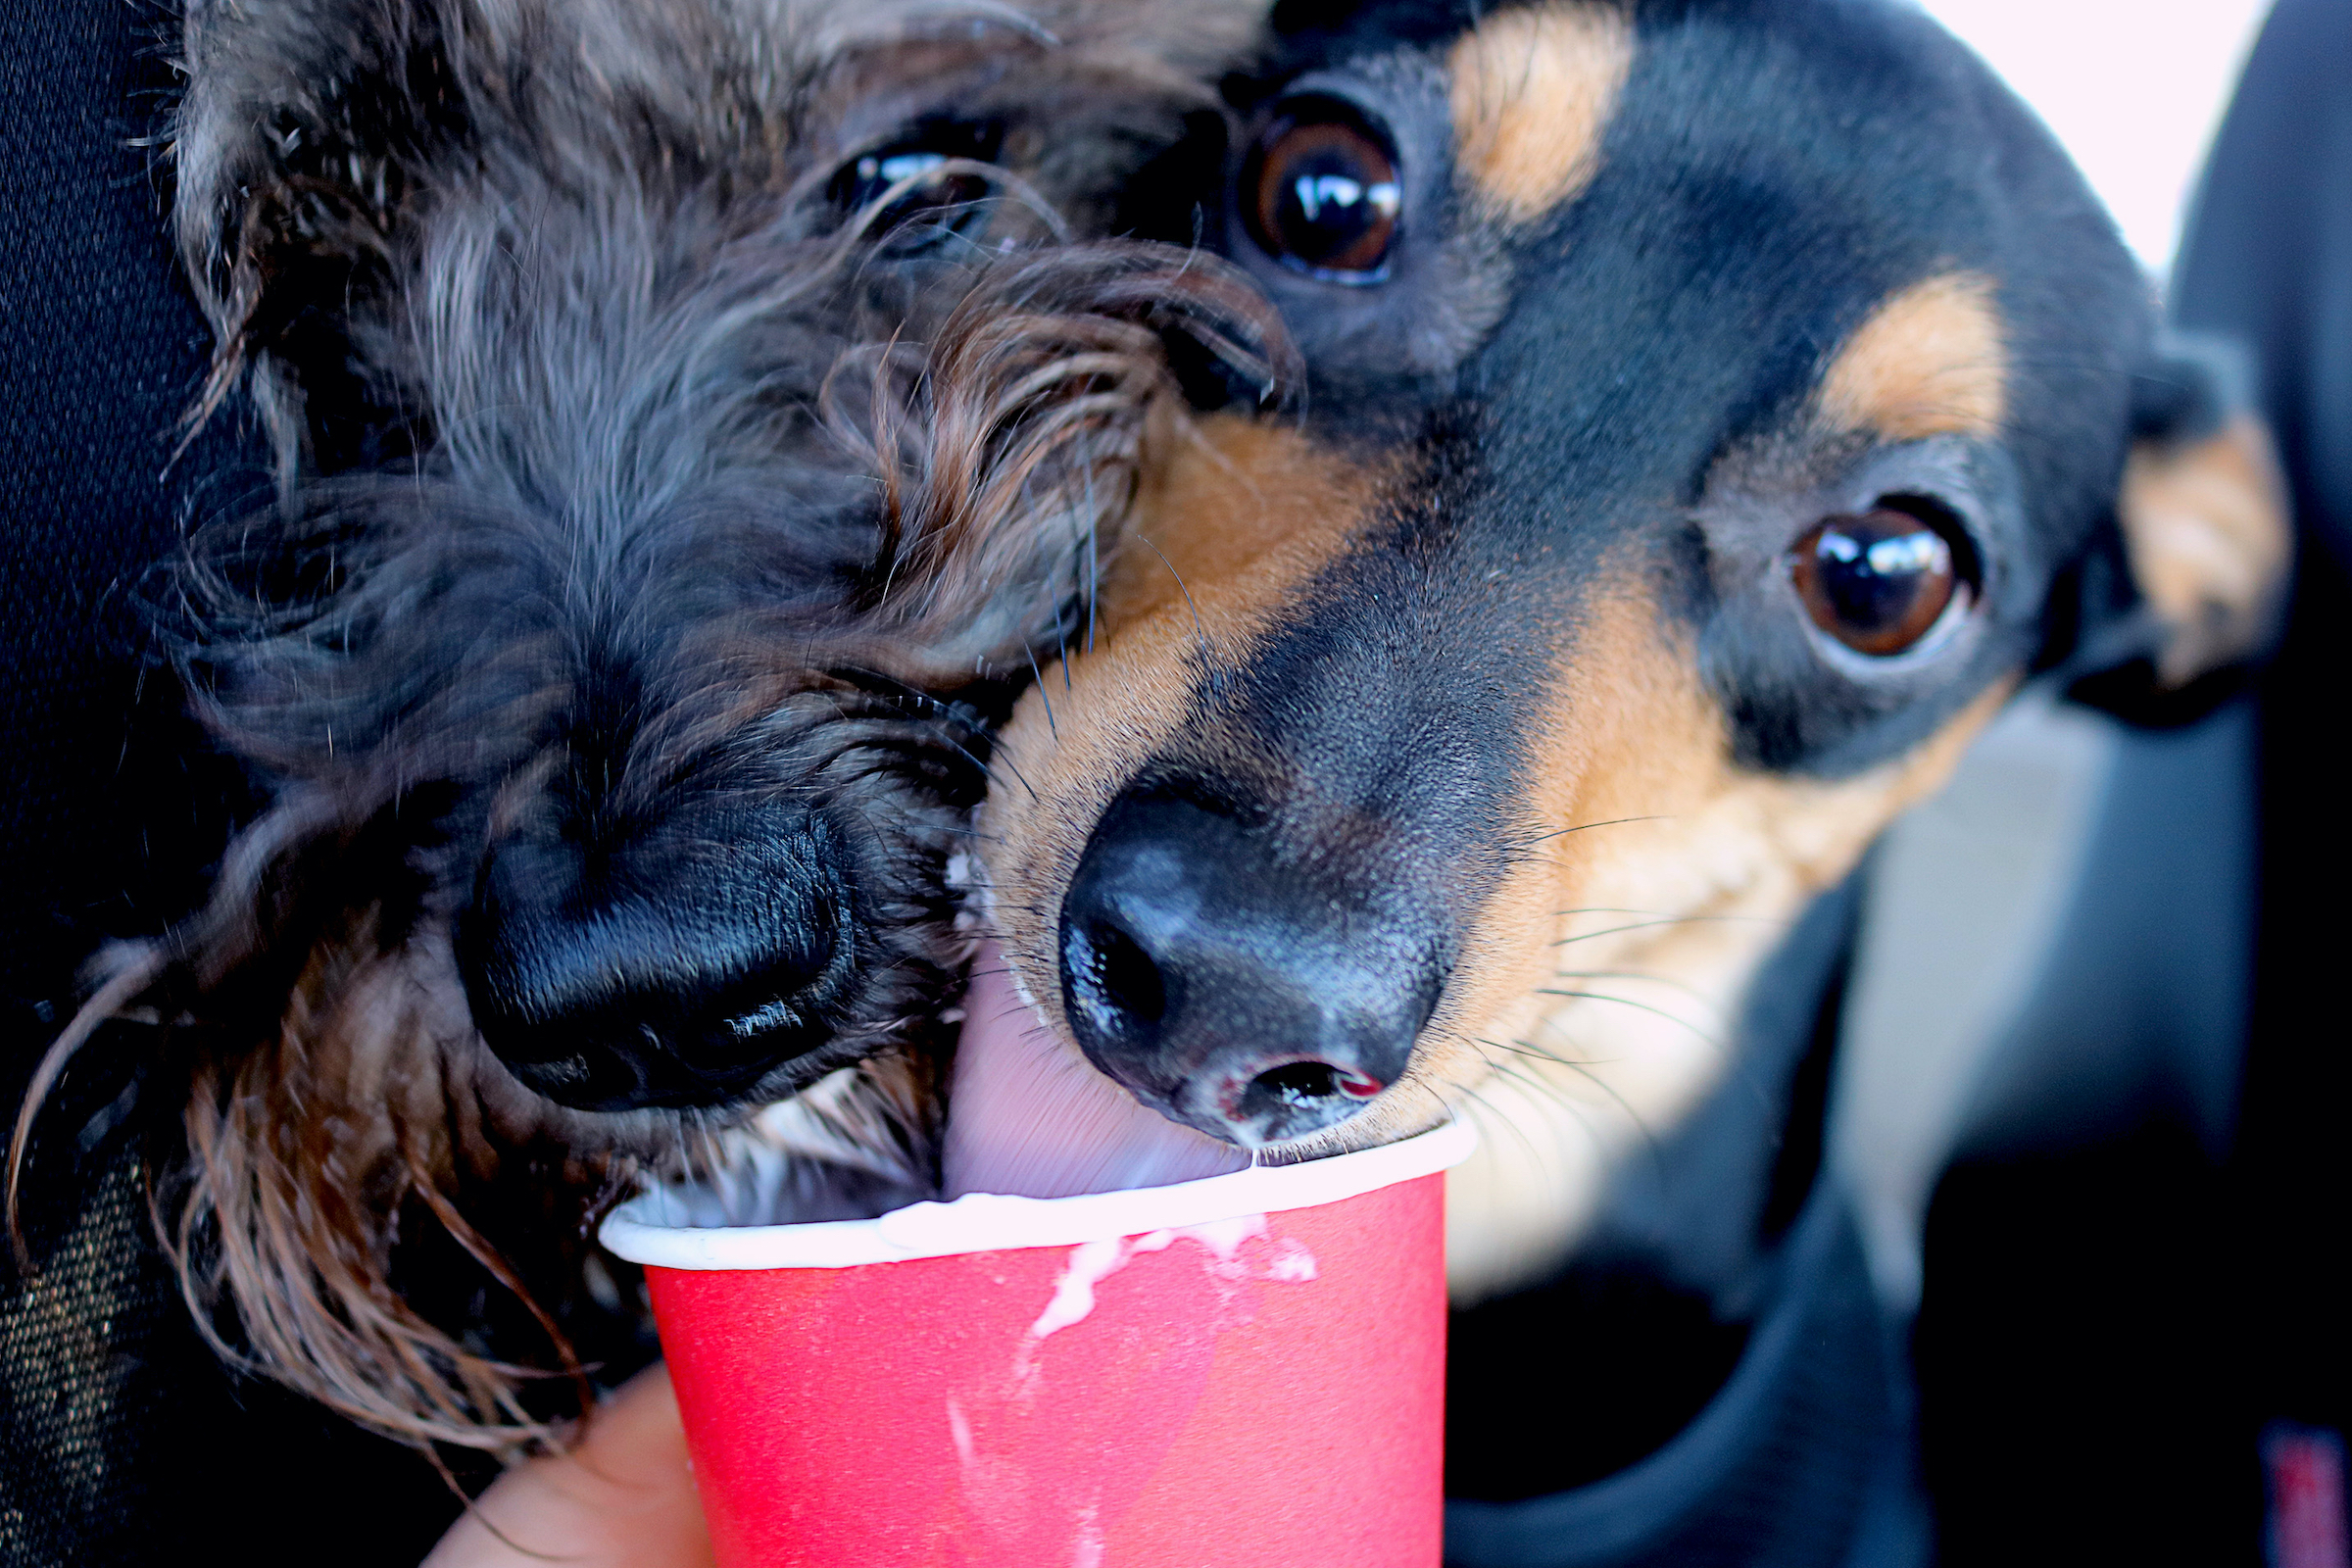 Schnauzer and Jack Russel terrier licking whipped cream out of a red cup